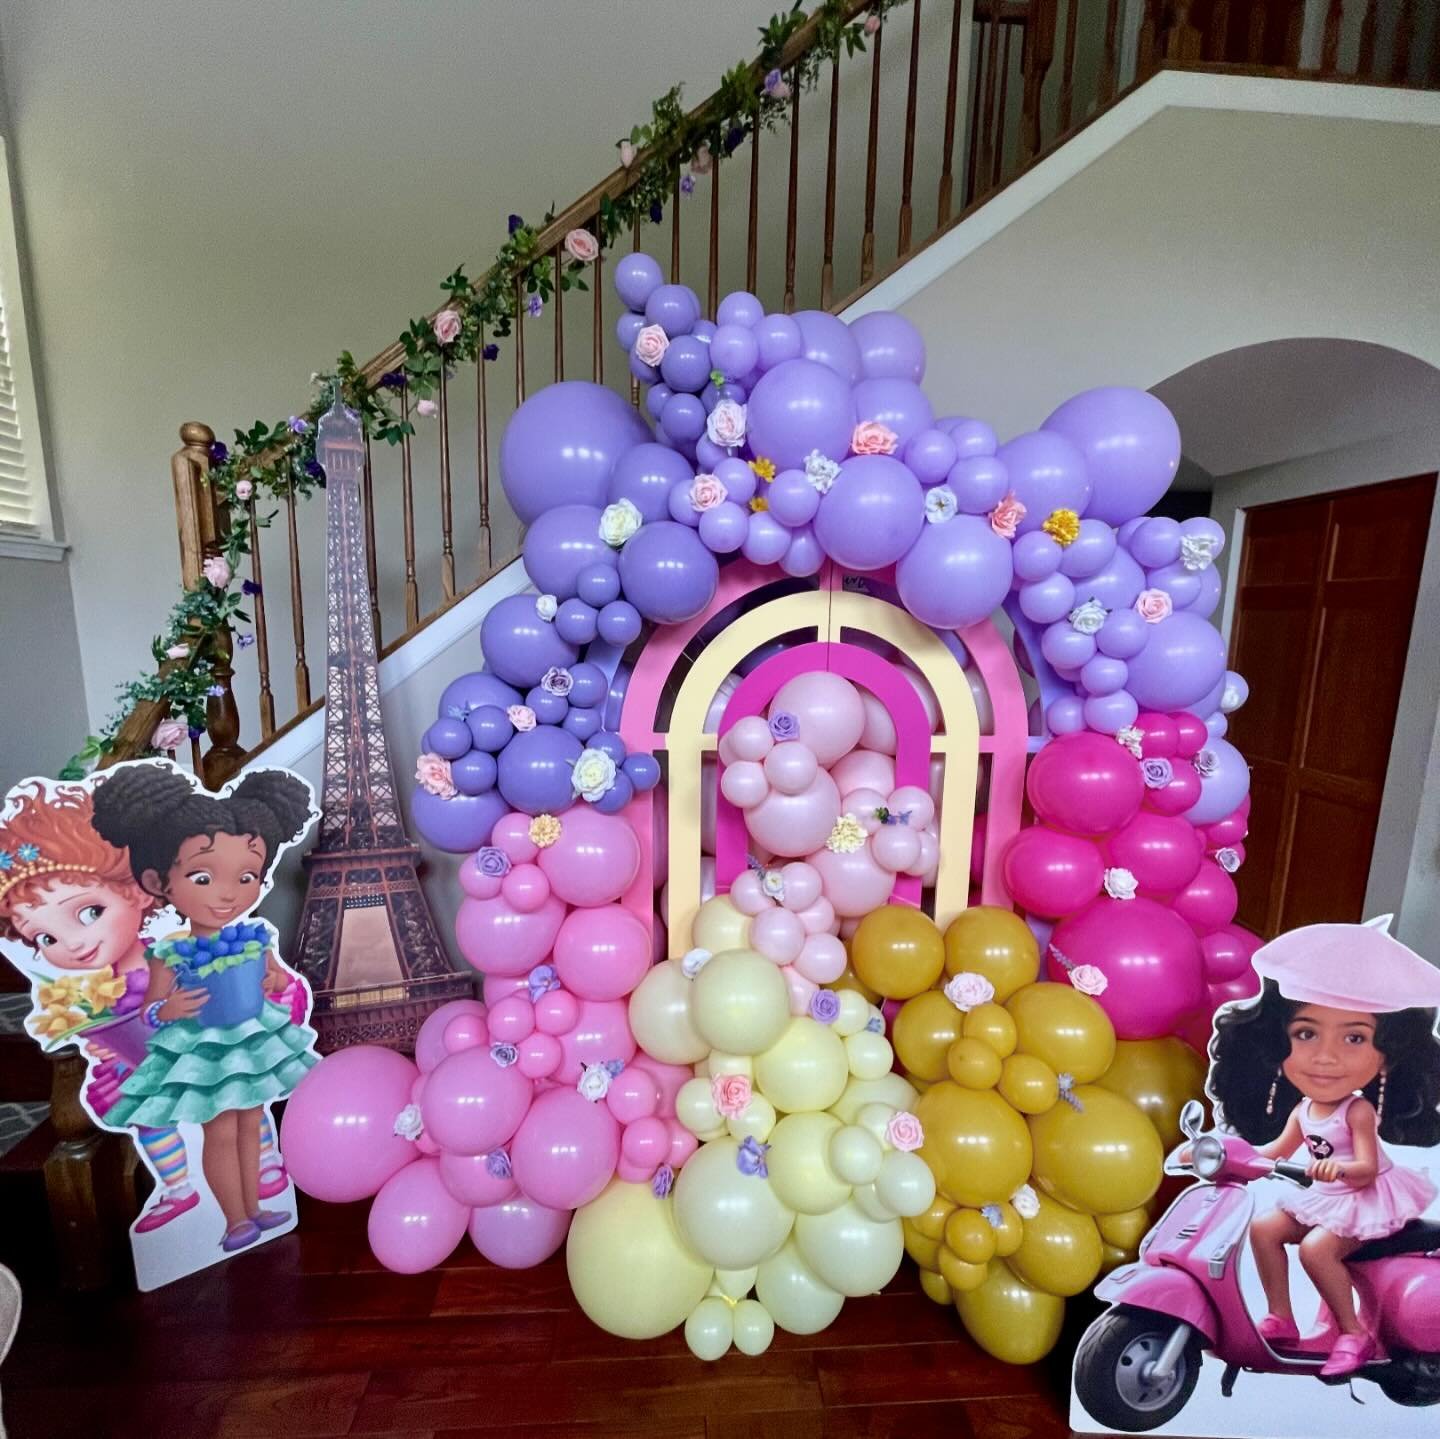 Balloons, props, banners, picnics, bounce houses, and more ! We have all the fun ! Your greatest party is only a dream away 💕 #bonjourtofour #chicagopartyplanner #chicagoeventplanner #chicagopartydecorator #chicagobouncehouserentals #whitebouncycast